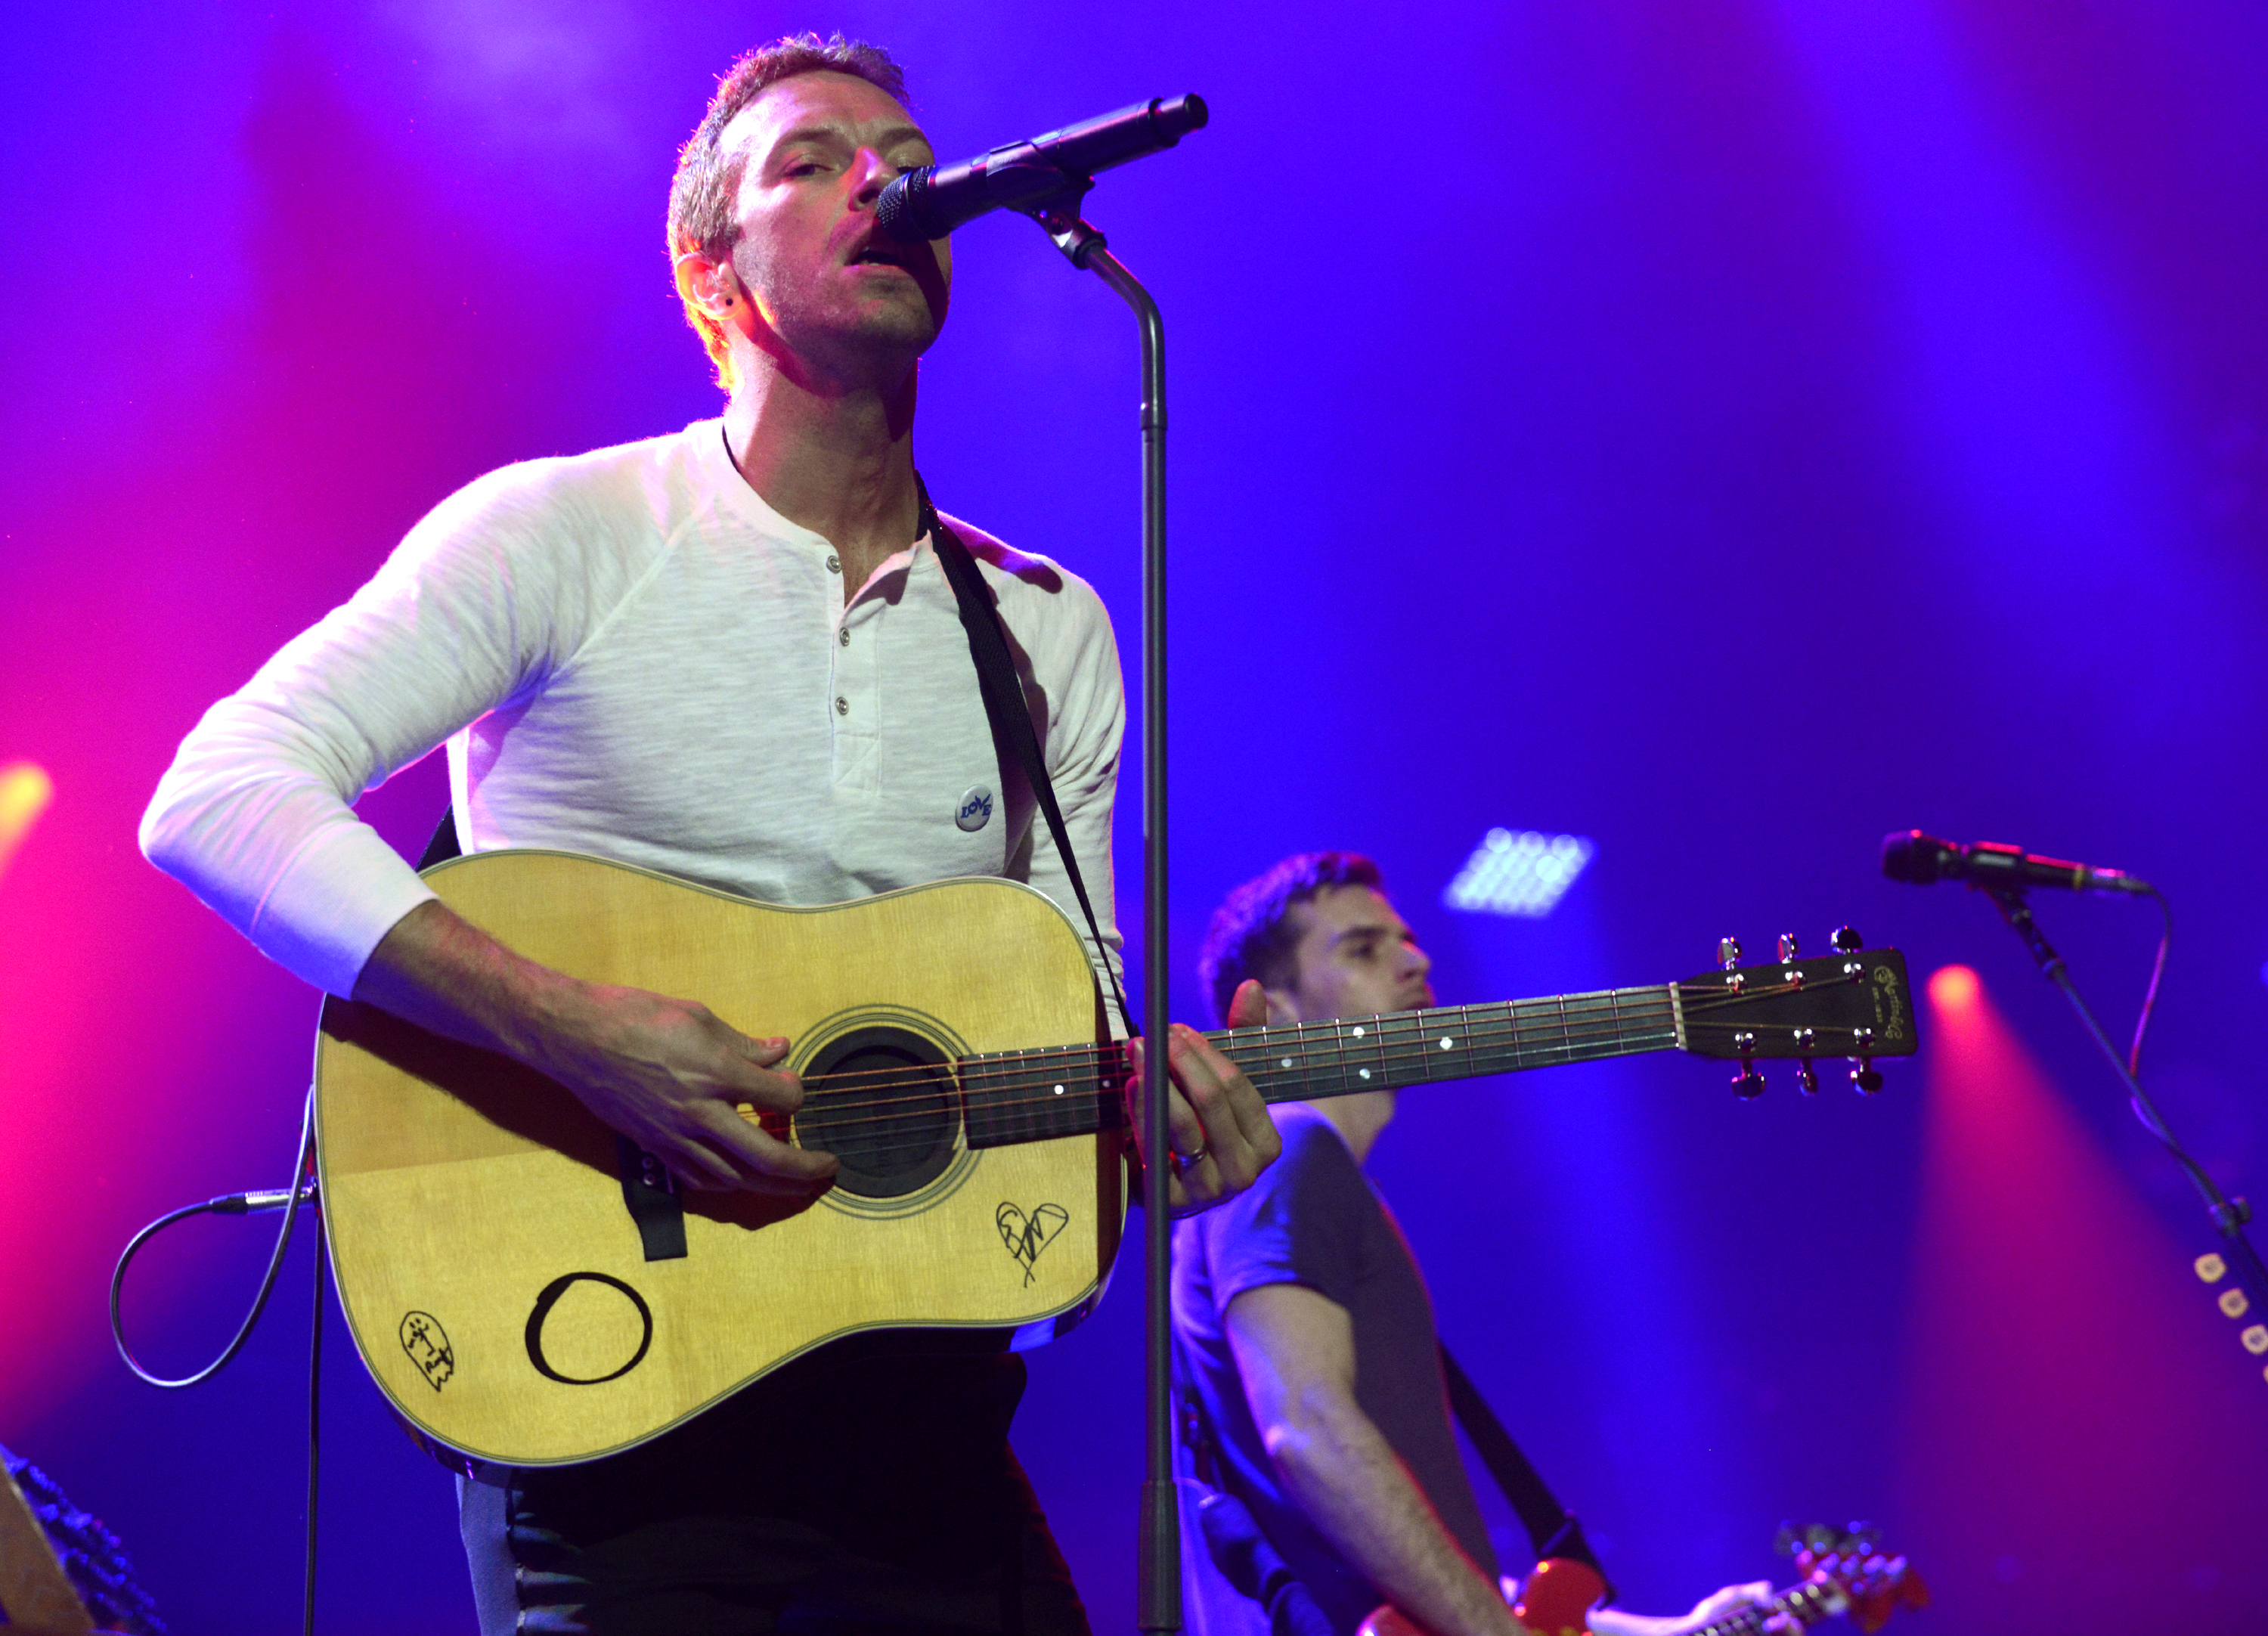 Chris Martin of Coldplay performs as part of the iTunes Festival at the Moody Theater on March 11, 2014 in Austin, Texas. (Tim Mosenfelder--Getty Images)